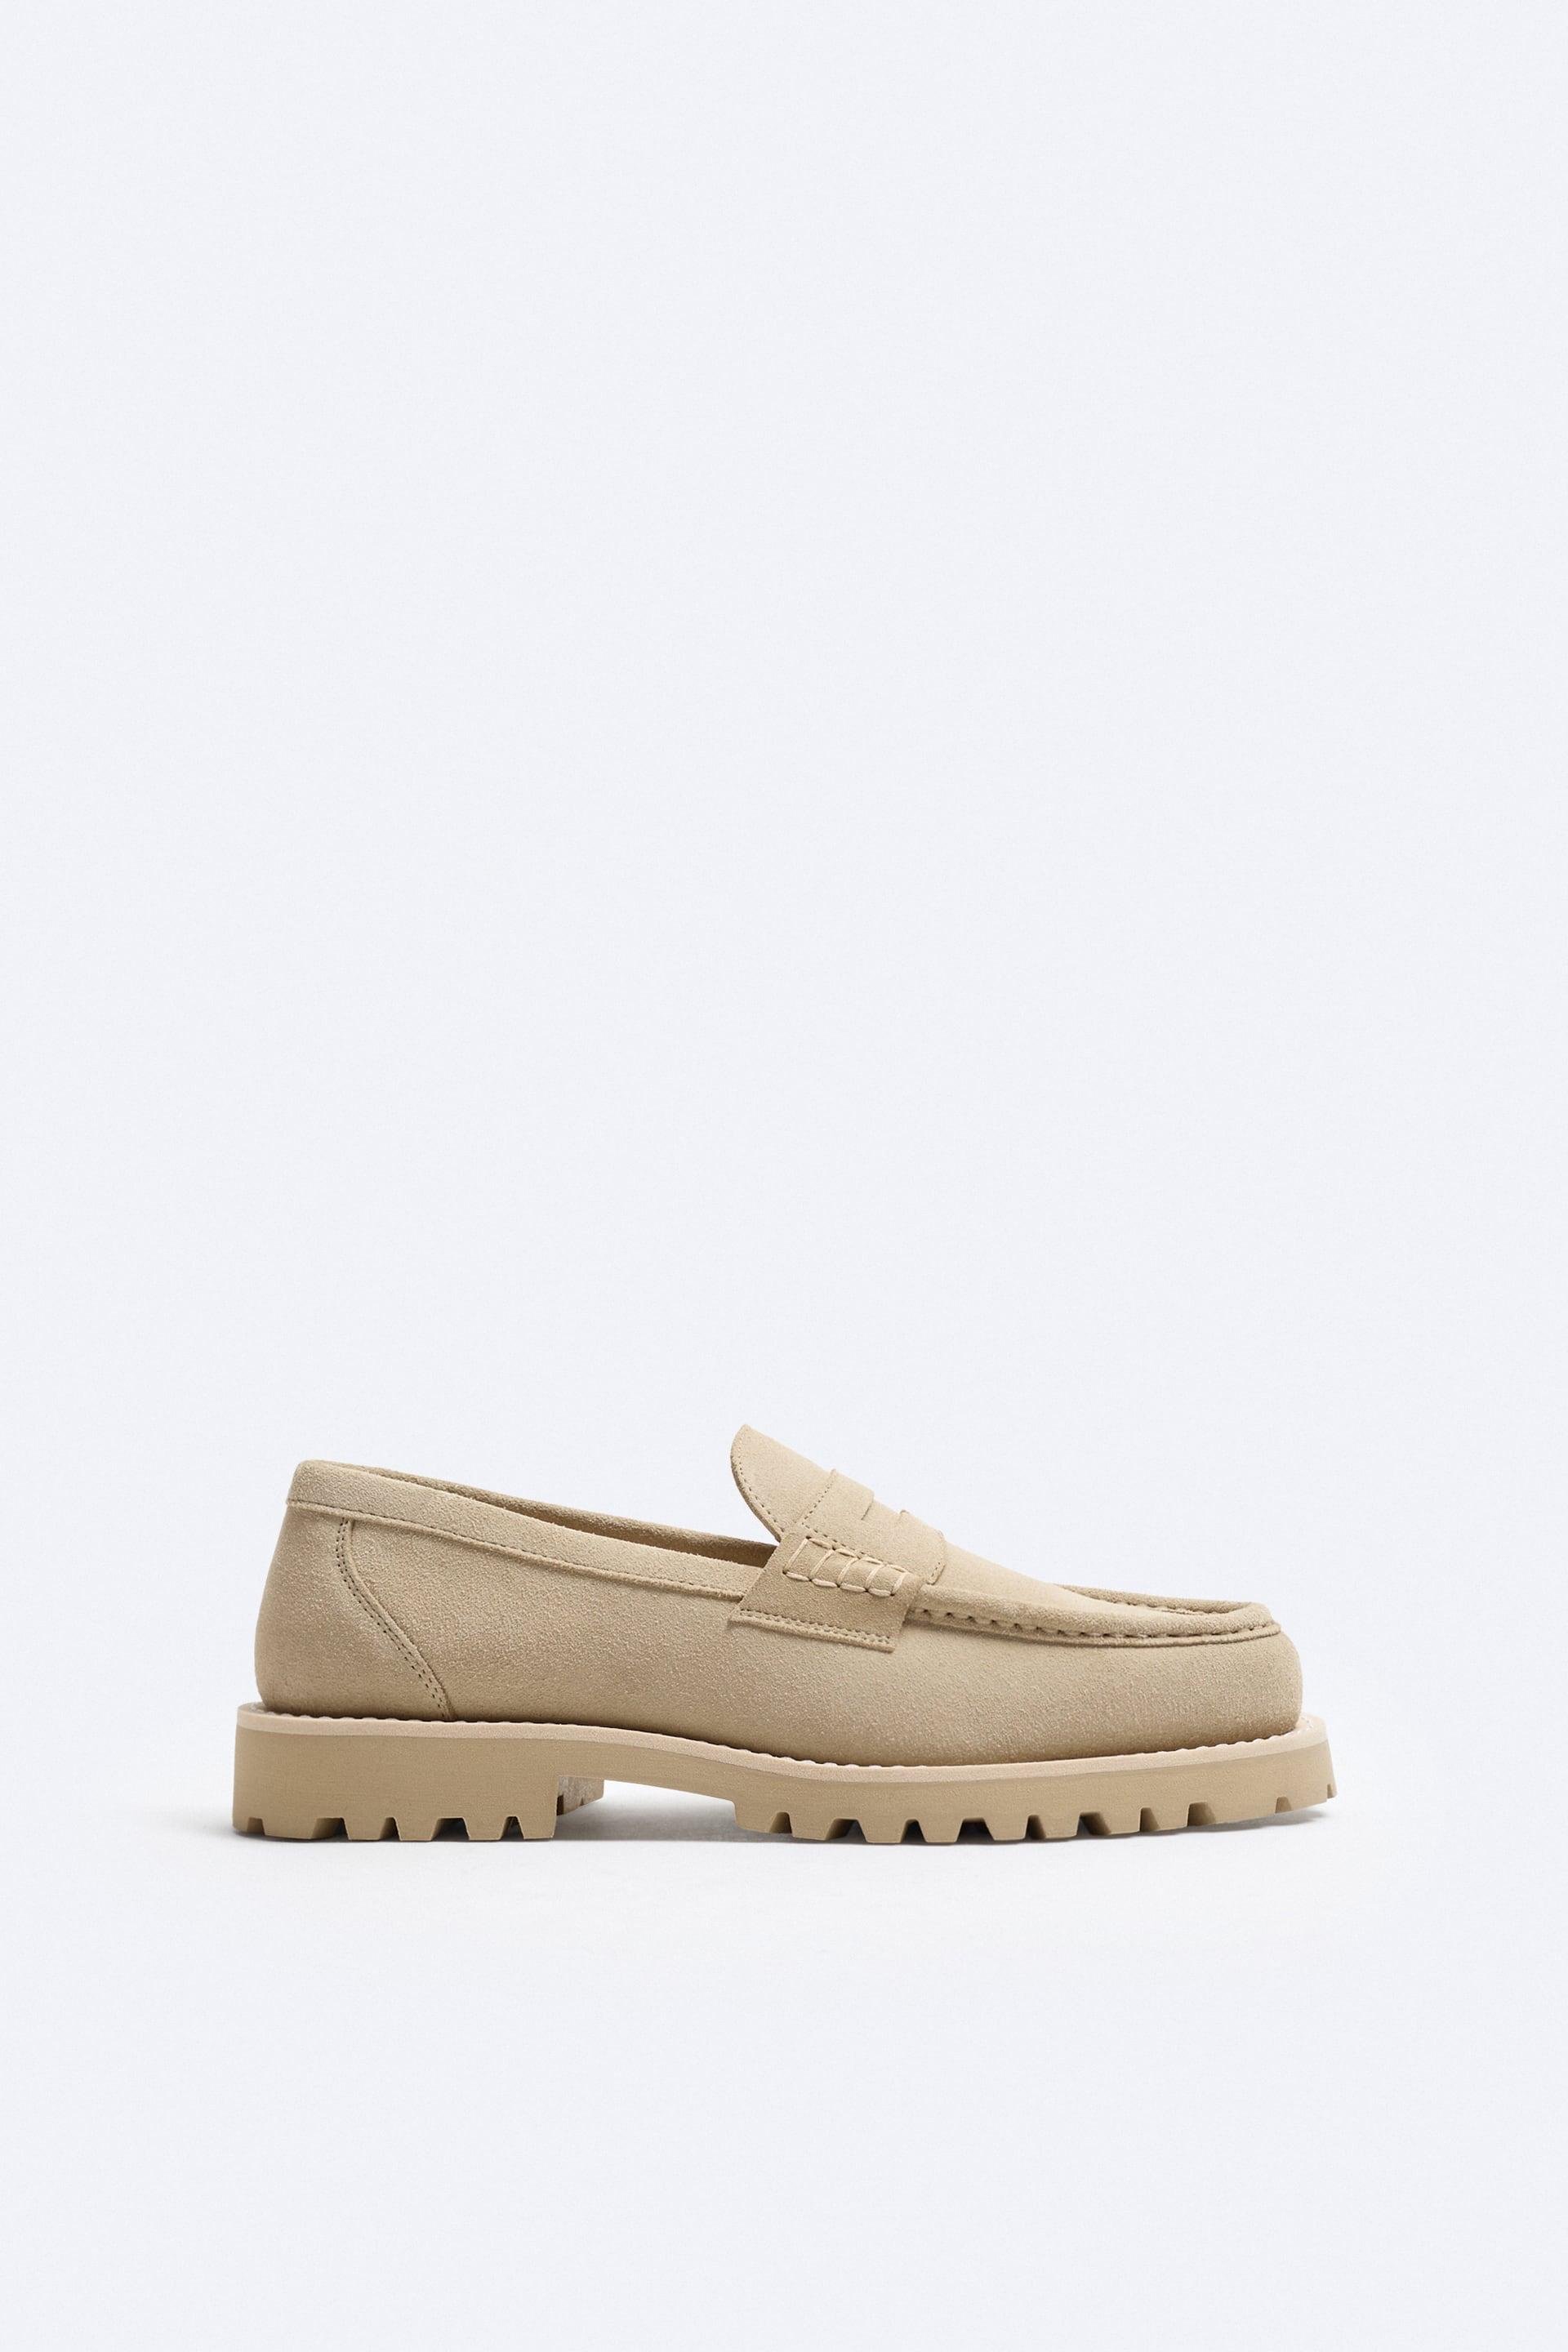 SUEDE PENNY LOAFERS by ZARA